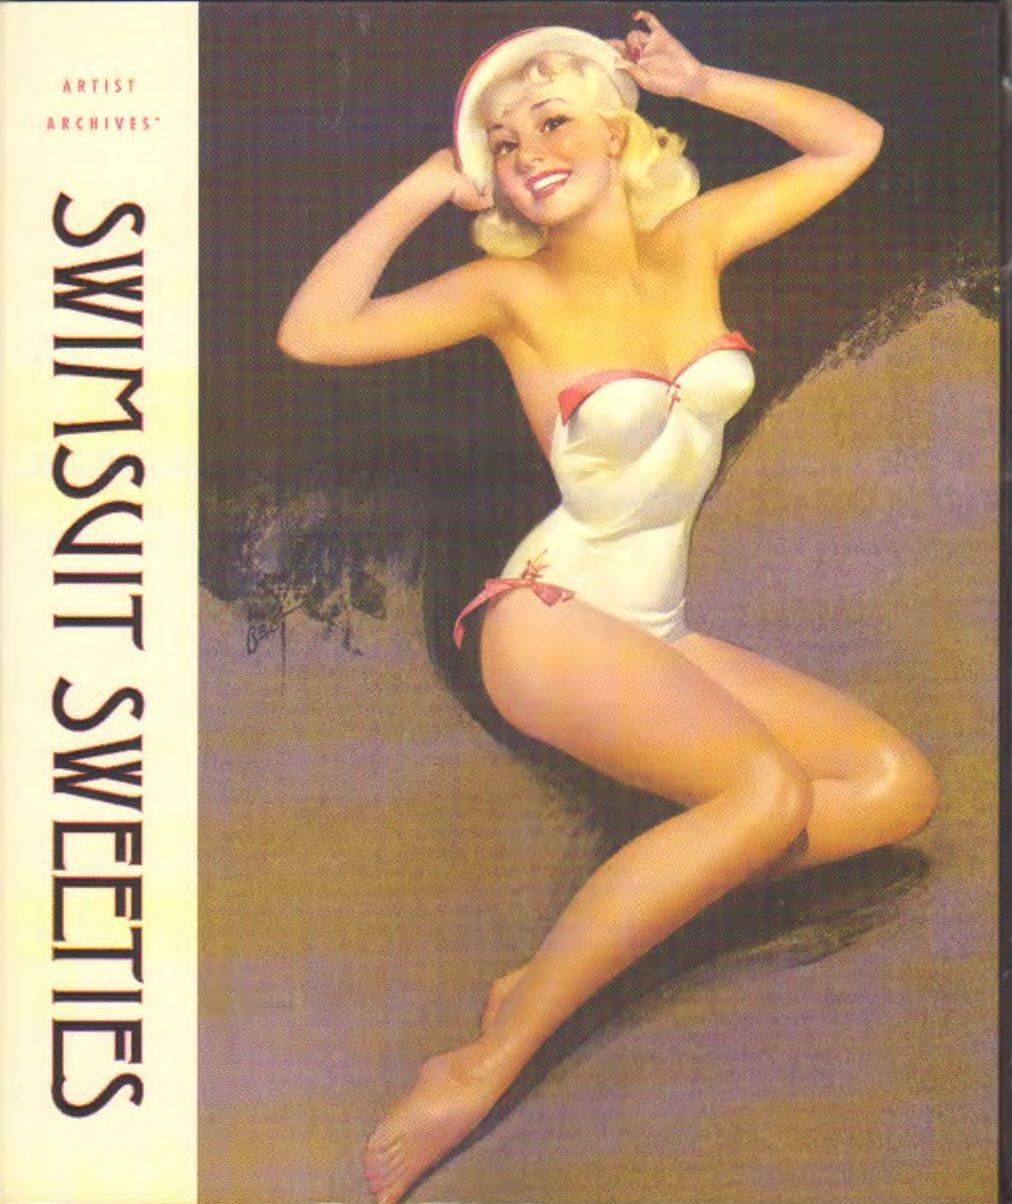 AA.VV - Artist Archives -  Swimsuit Sweeties